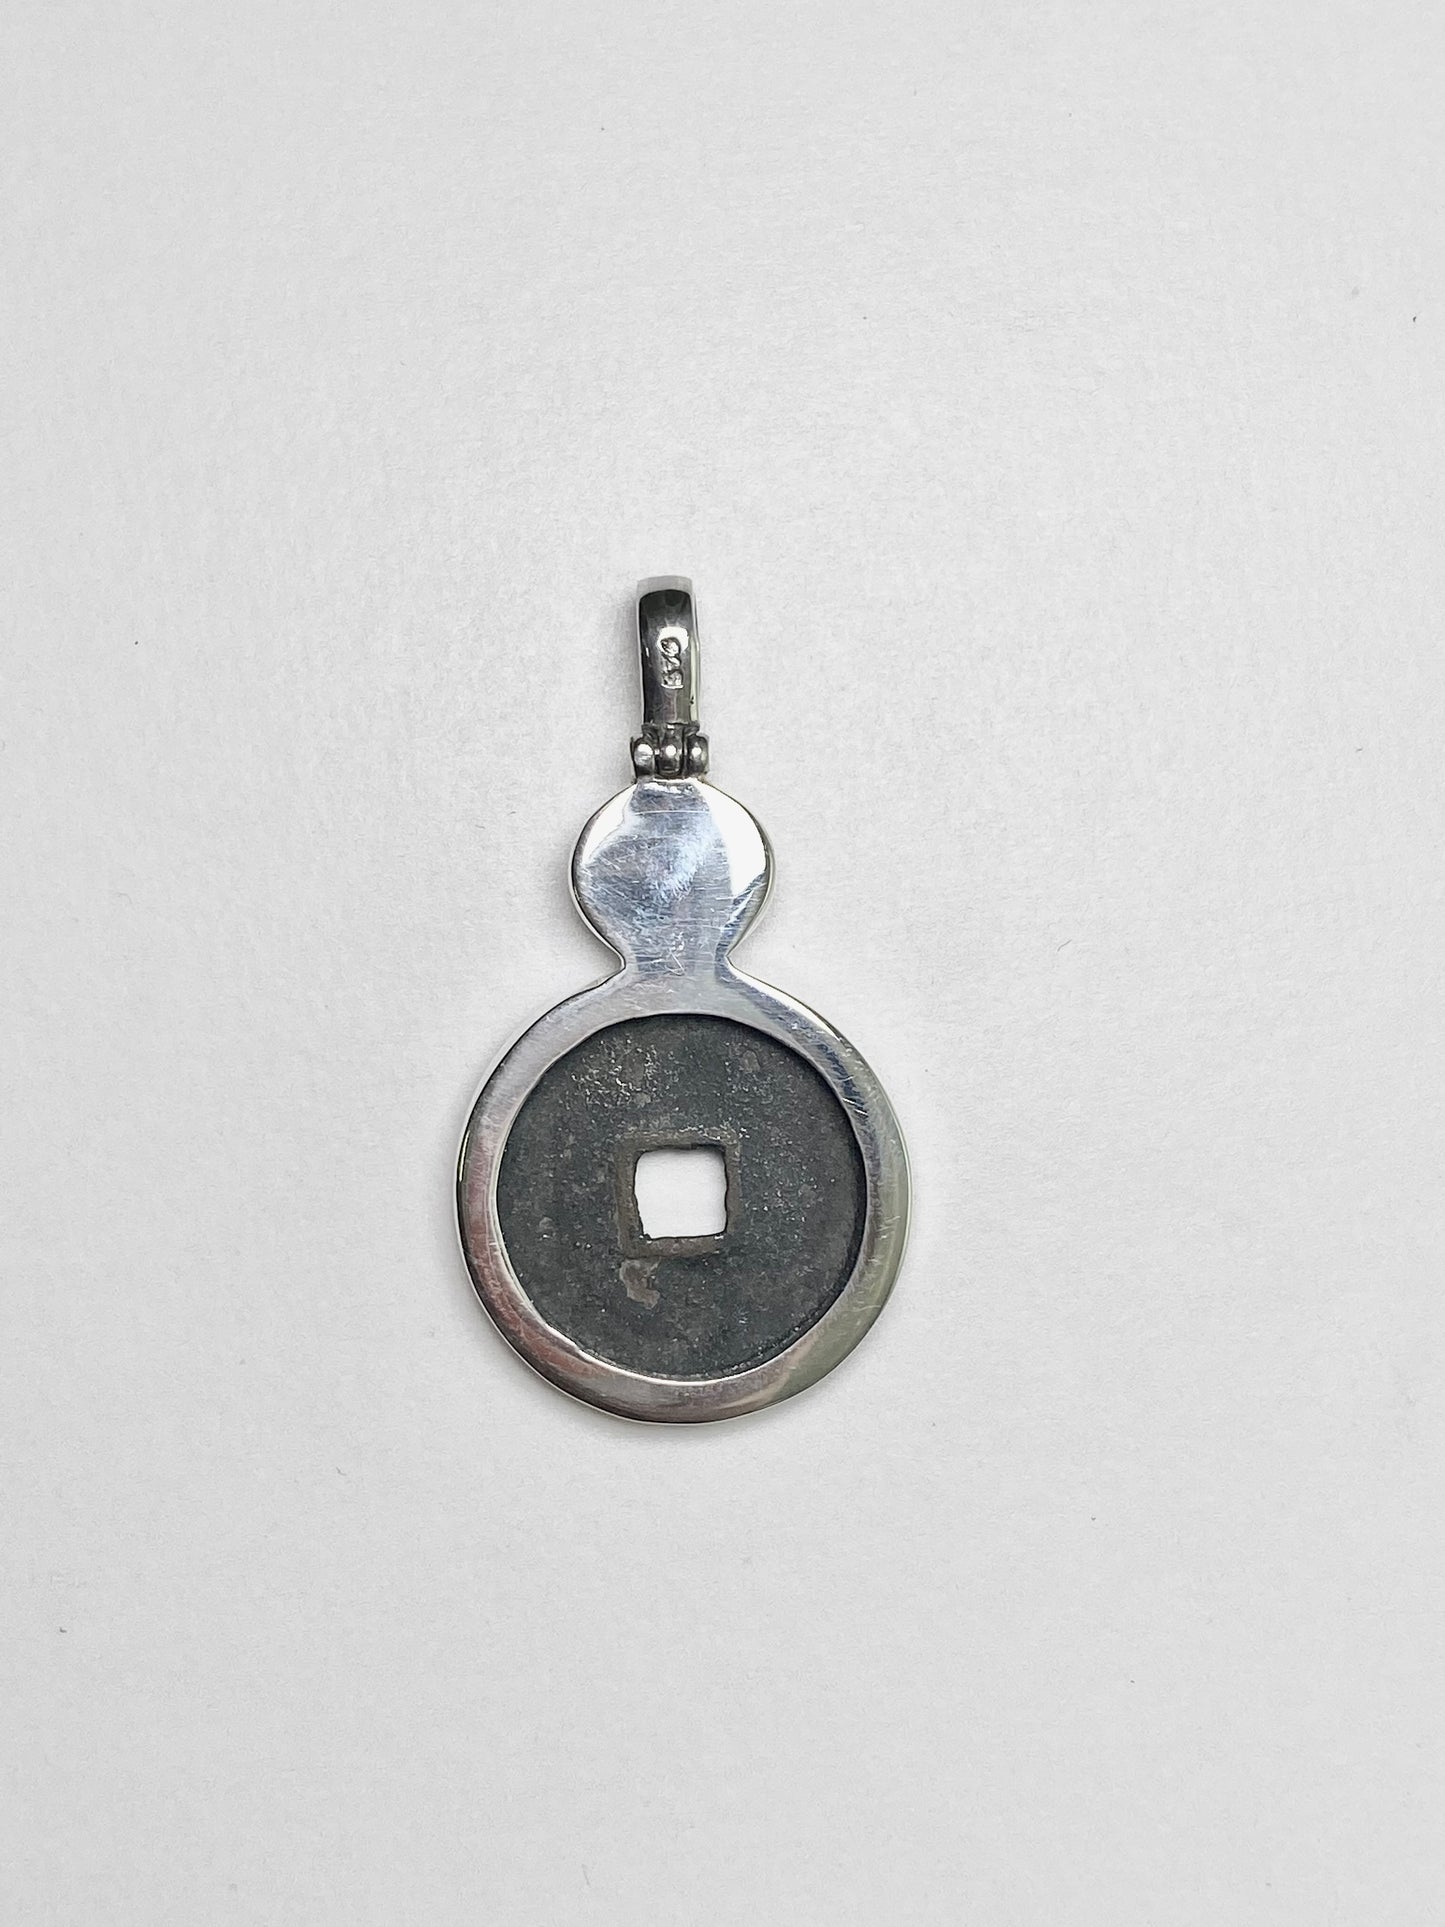 Antique early Ming Yong Le Reign Cash Coin Pendant- Sterling Silver w Turquoise circa 1408-1424